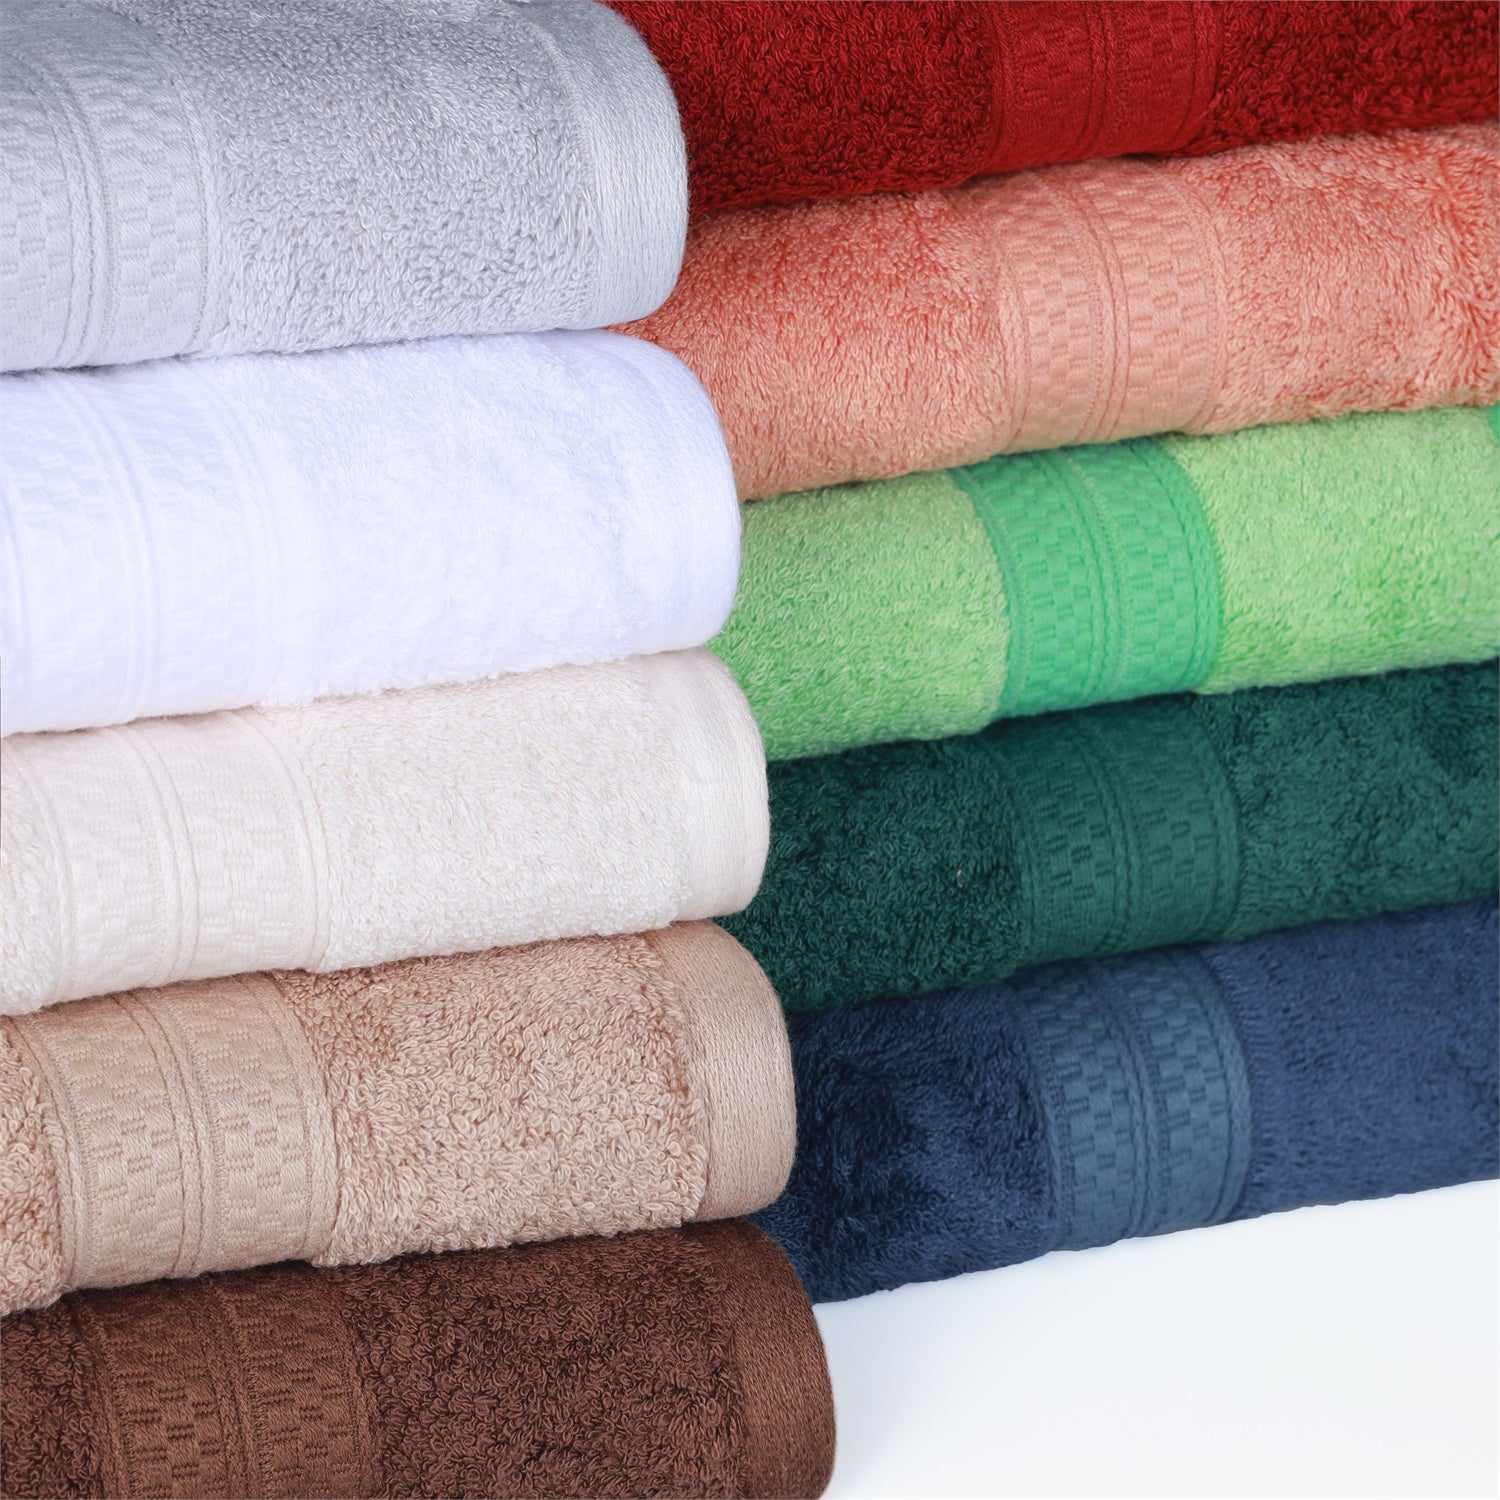 Luxury Bath Towels, 100% Cotton, Soft, Absorbent & Quick to Dry 2-pack  SUYJI 